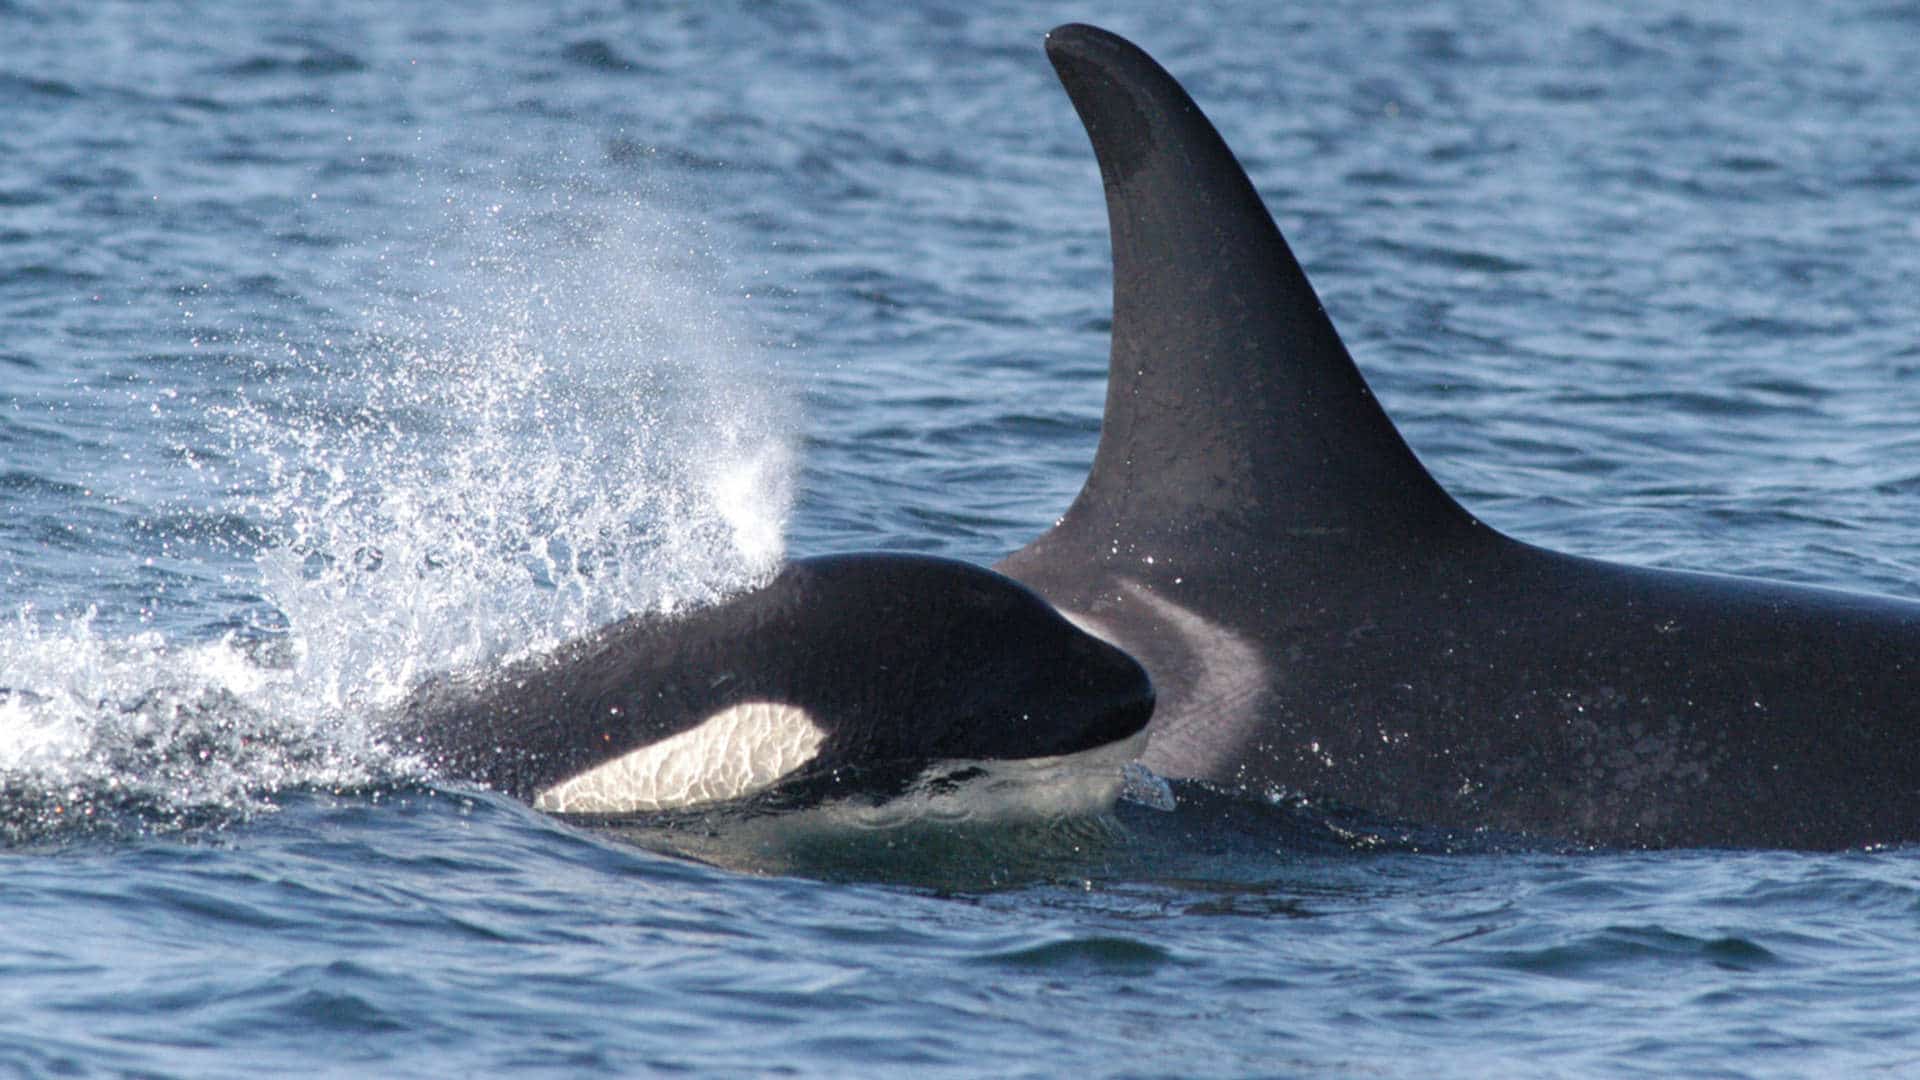 A southern resident orca calf swimming alongside its mother.